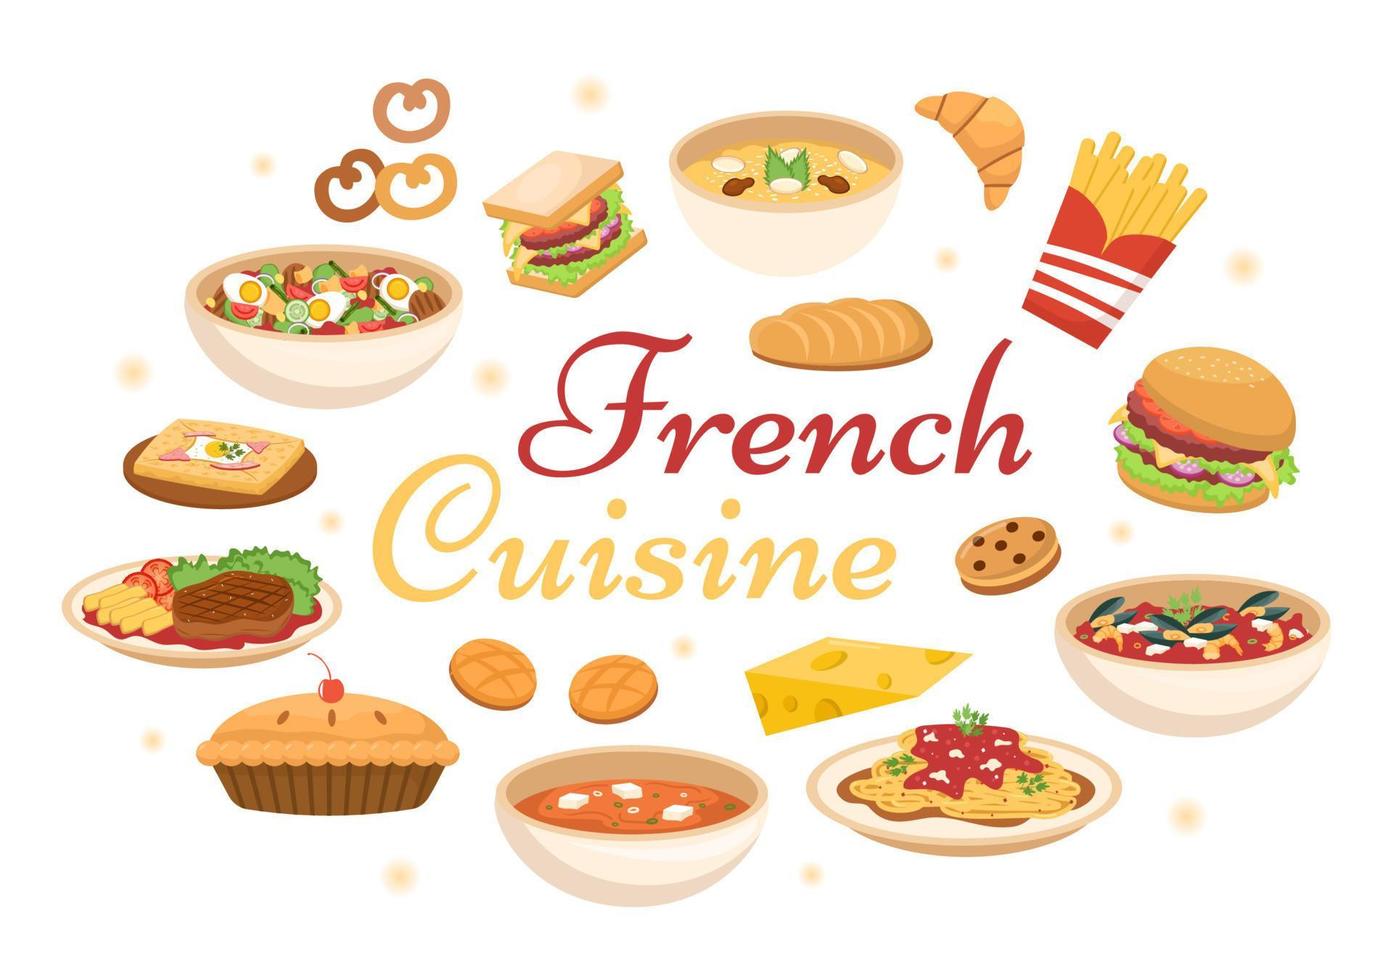 French Cuisine Restaurant with Various Traditional or National Food Dish of France on Flat Style Cartoon Hand Drawn Templates Illustration vector